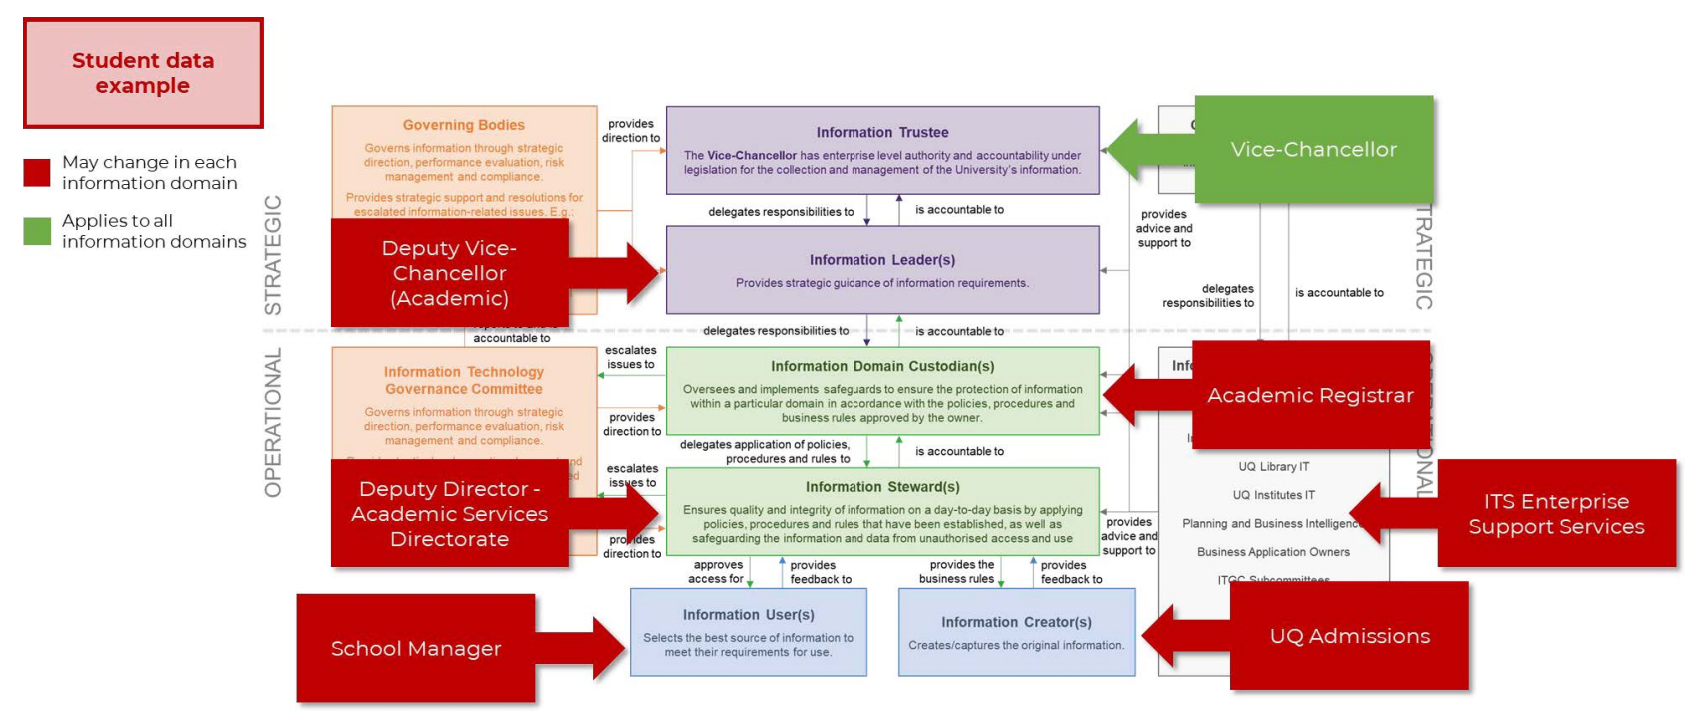 Image of decision rights model